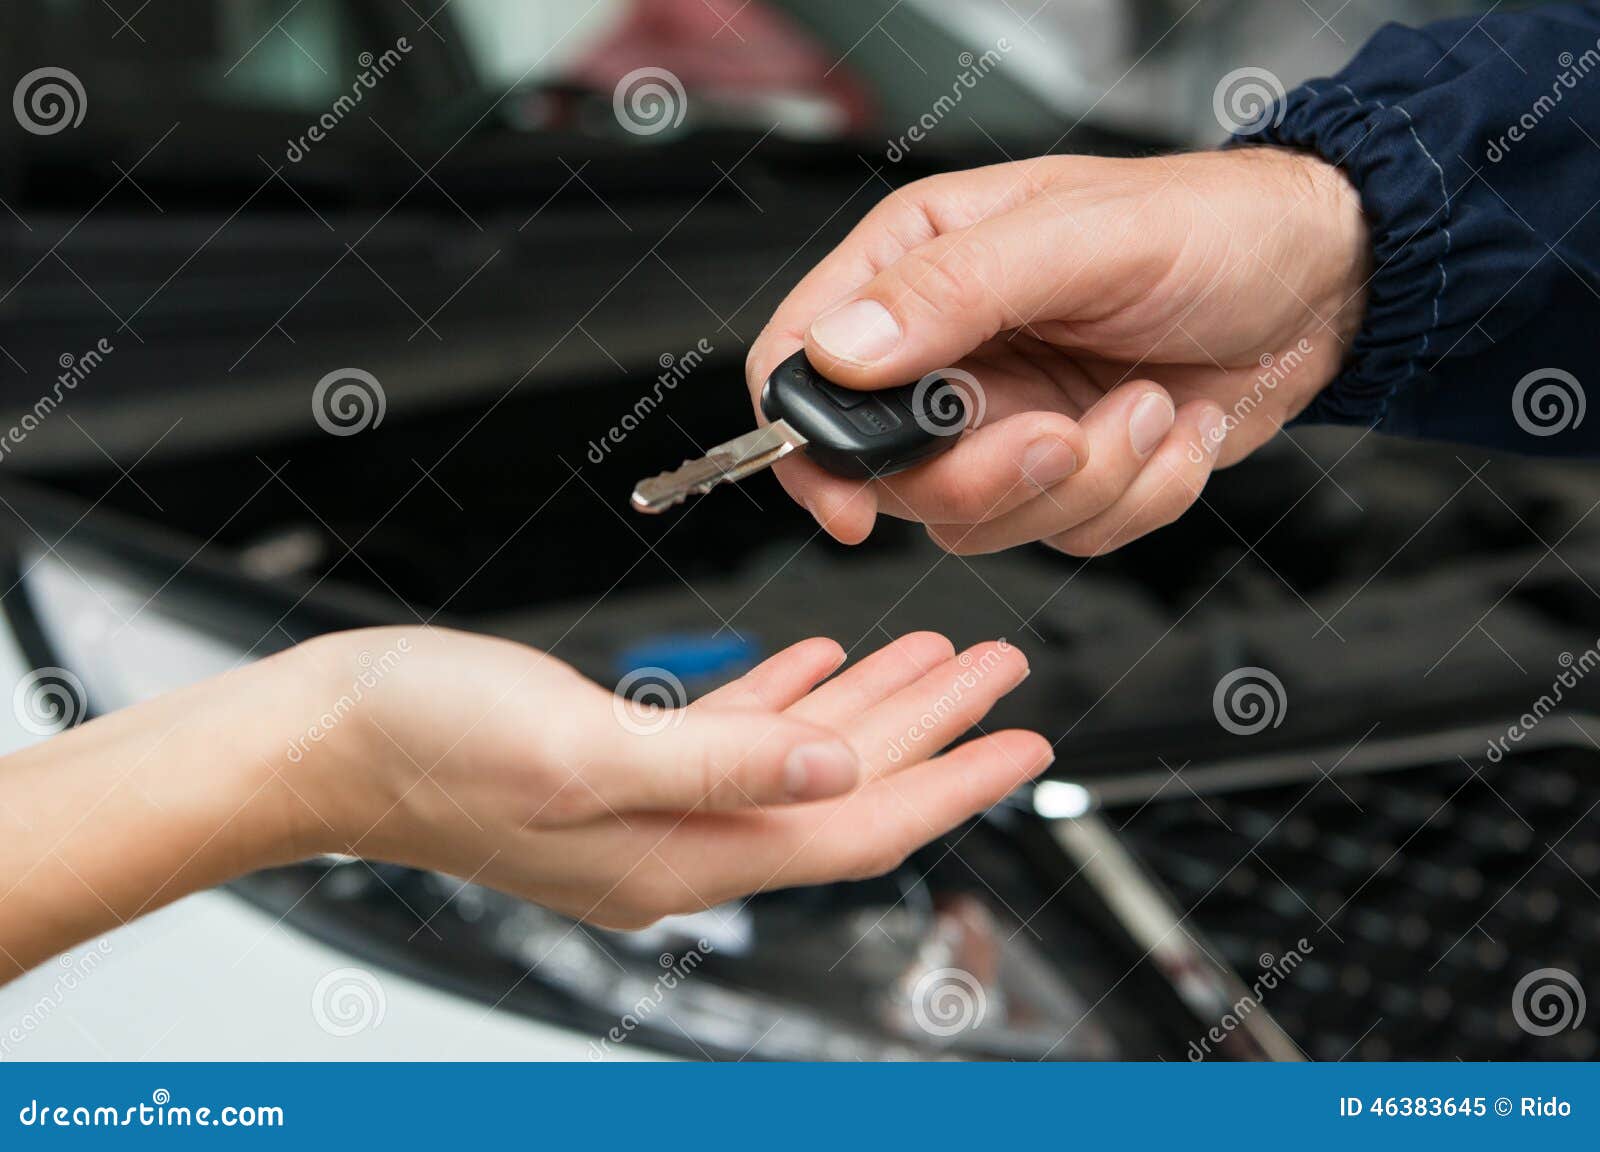 Car Repaired! stock image. Image of hand, maintenance - 46383645